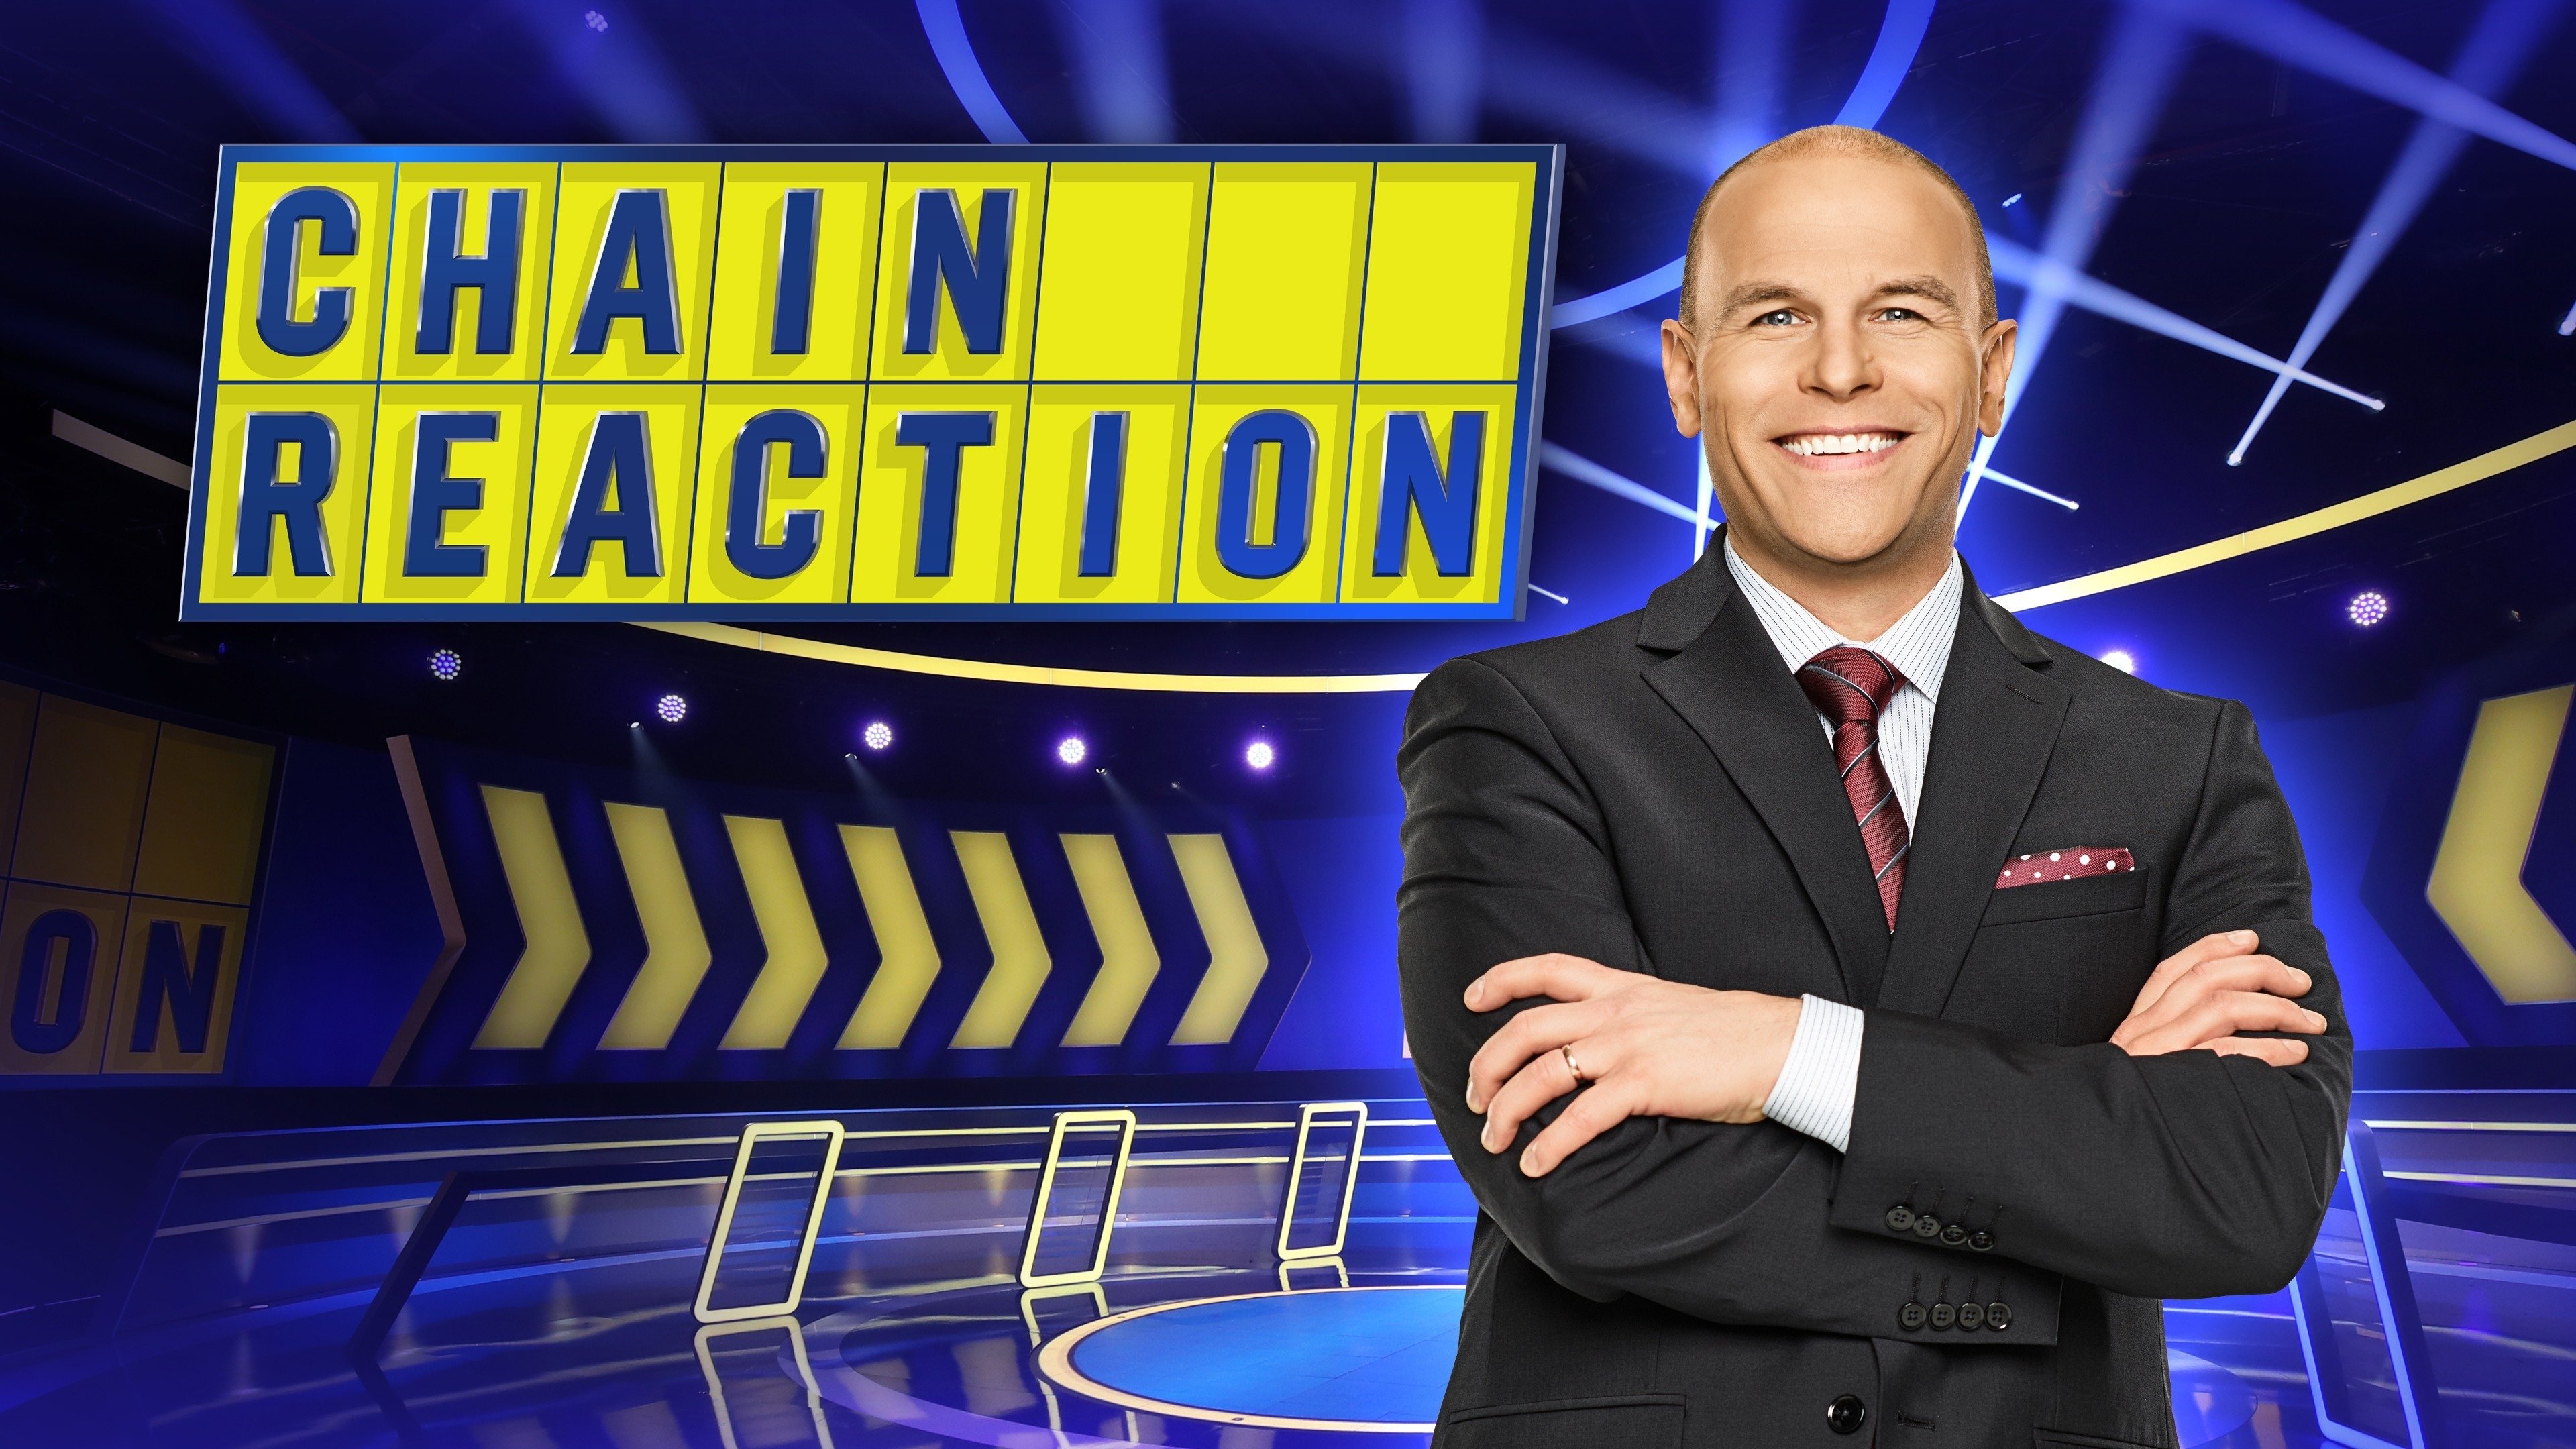 chain reaction word online game